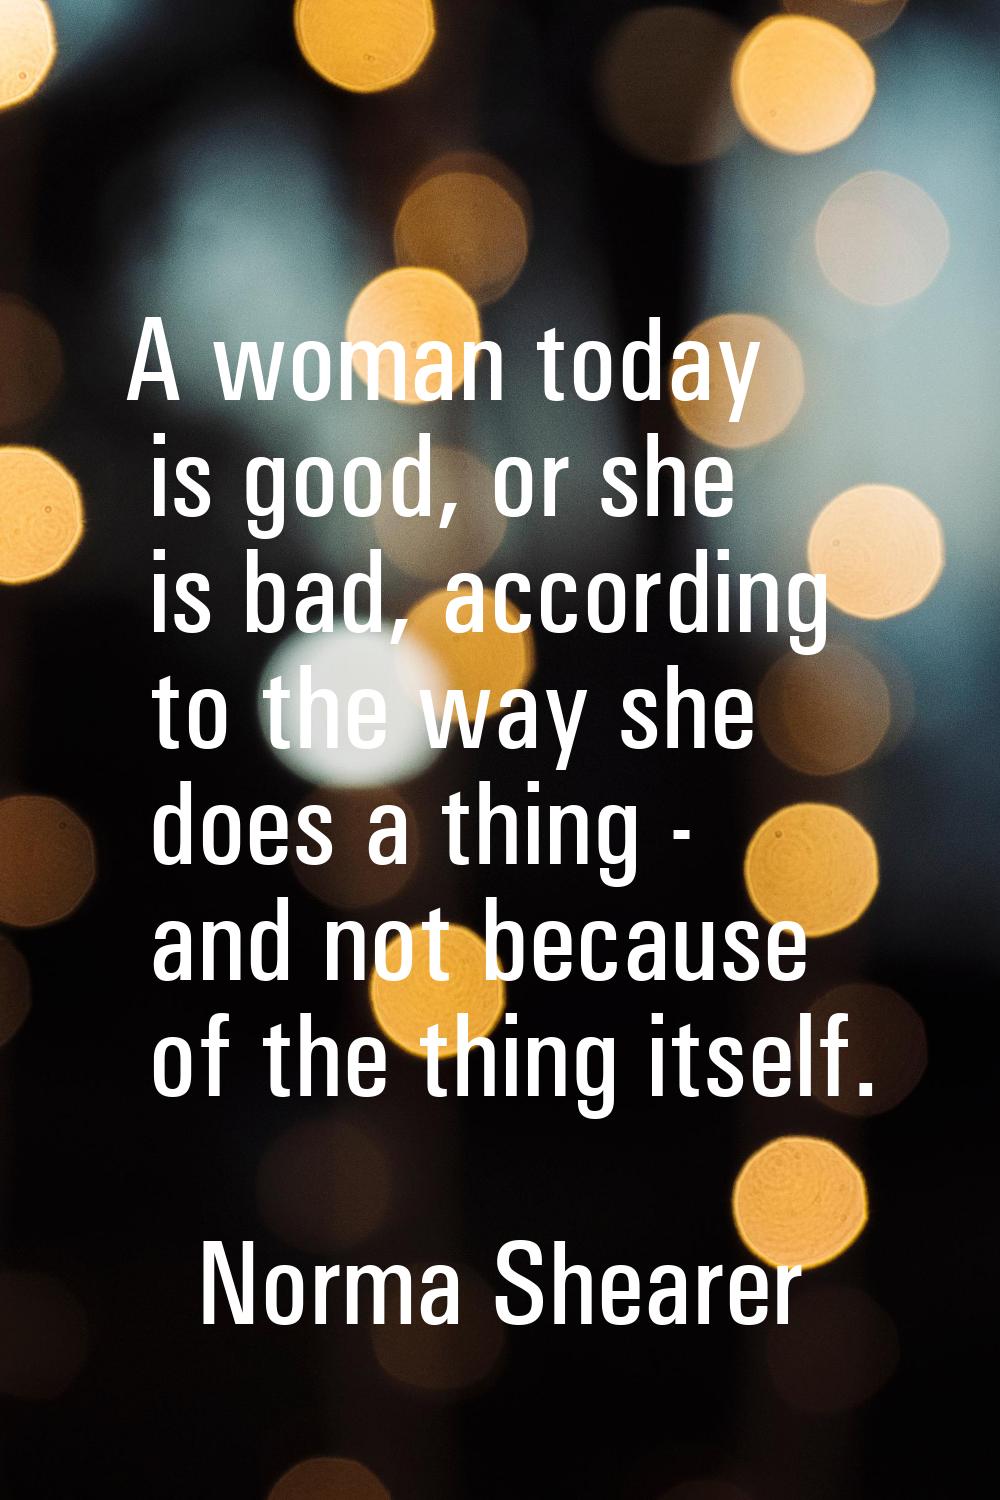 A woman today is good, or she is bad, according to the way she does a thing - and not because of th